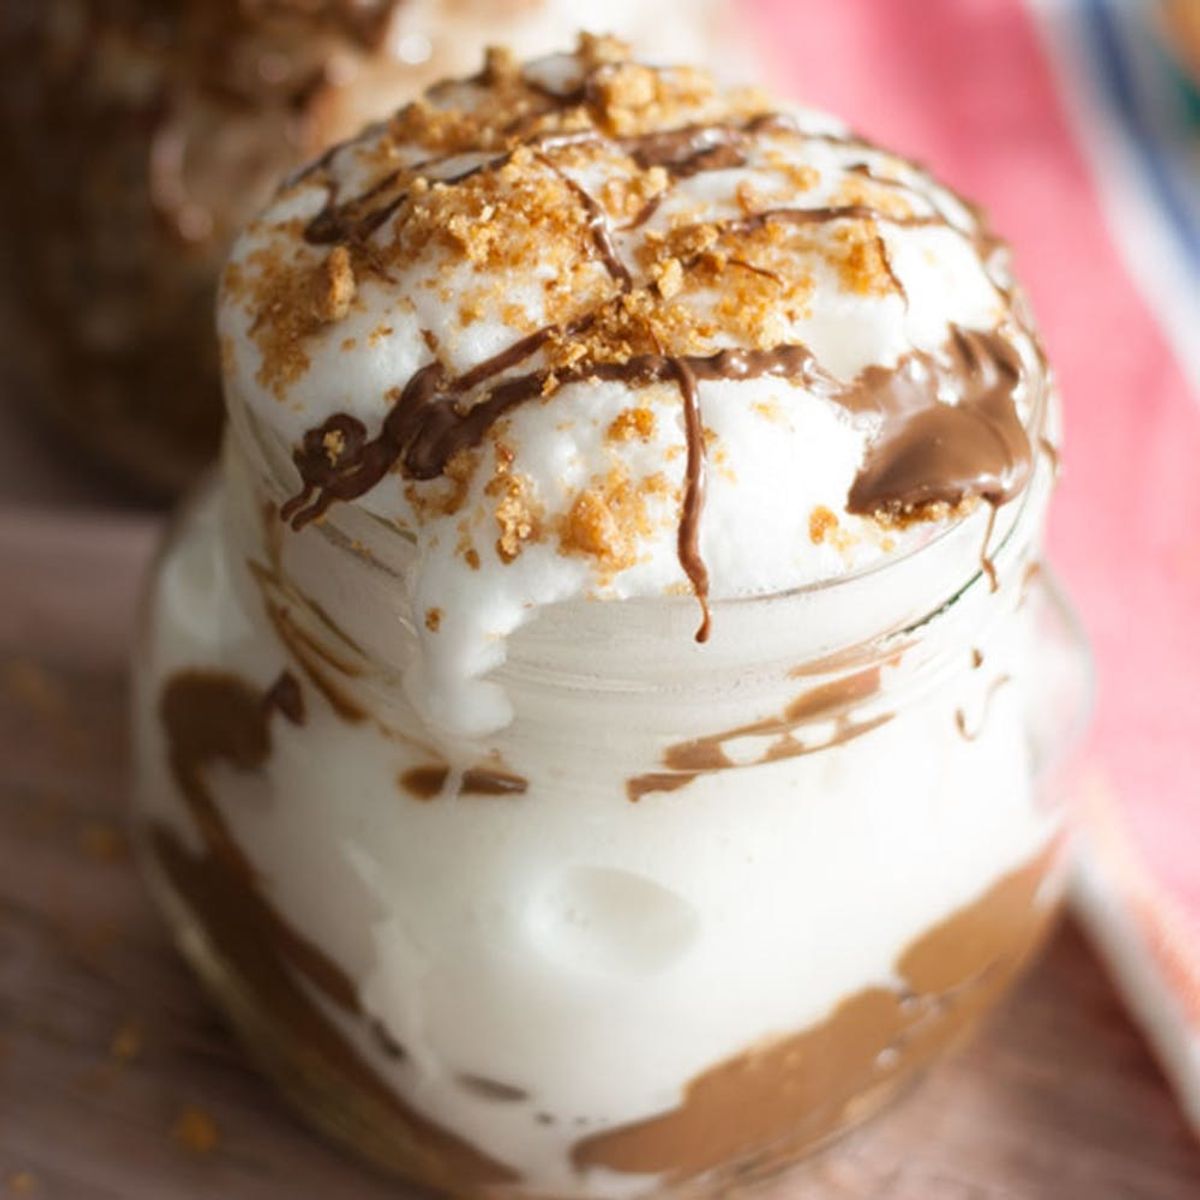 Get into Camping Mode With This Easy Aquafaba S’mores Parfait